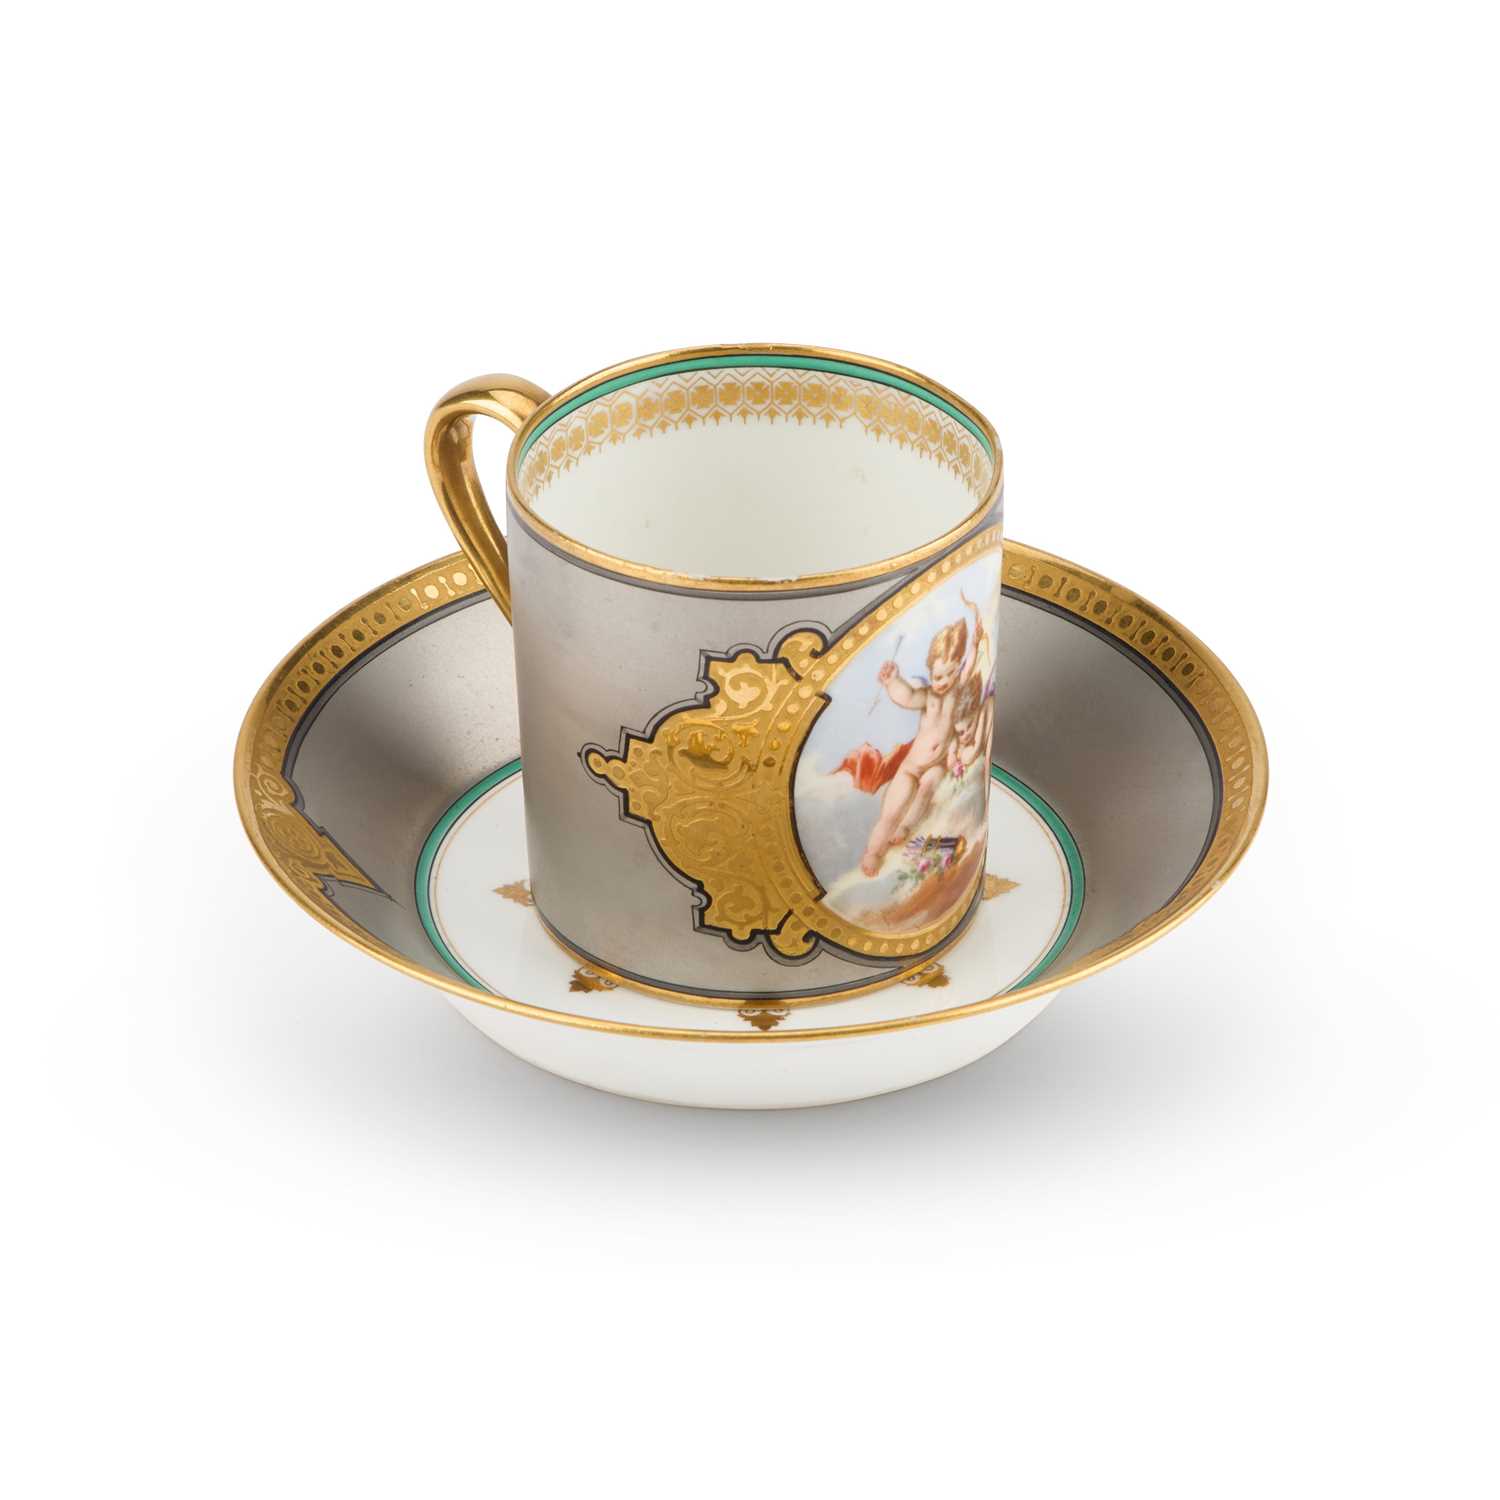 A SÈVRES STYLE CUP AND SAUCER, LATE 19TH CENTURY